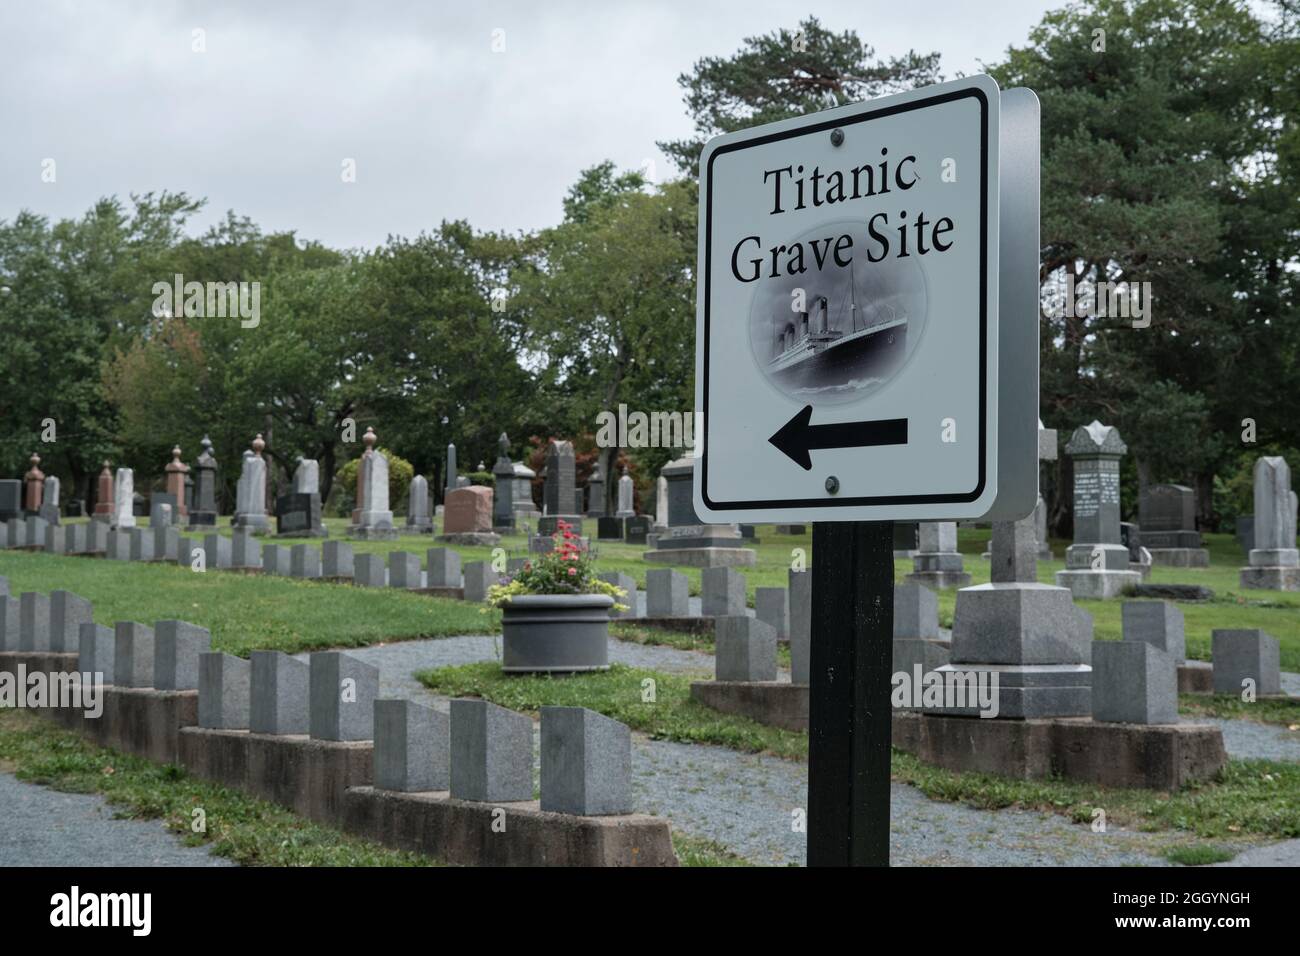 Halifax, Nova Scotia: The Titanic Grave Site at Fairview Lawn Cemetery. Sign pointing direction to cemetery Stock Photo